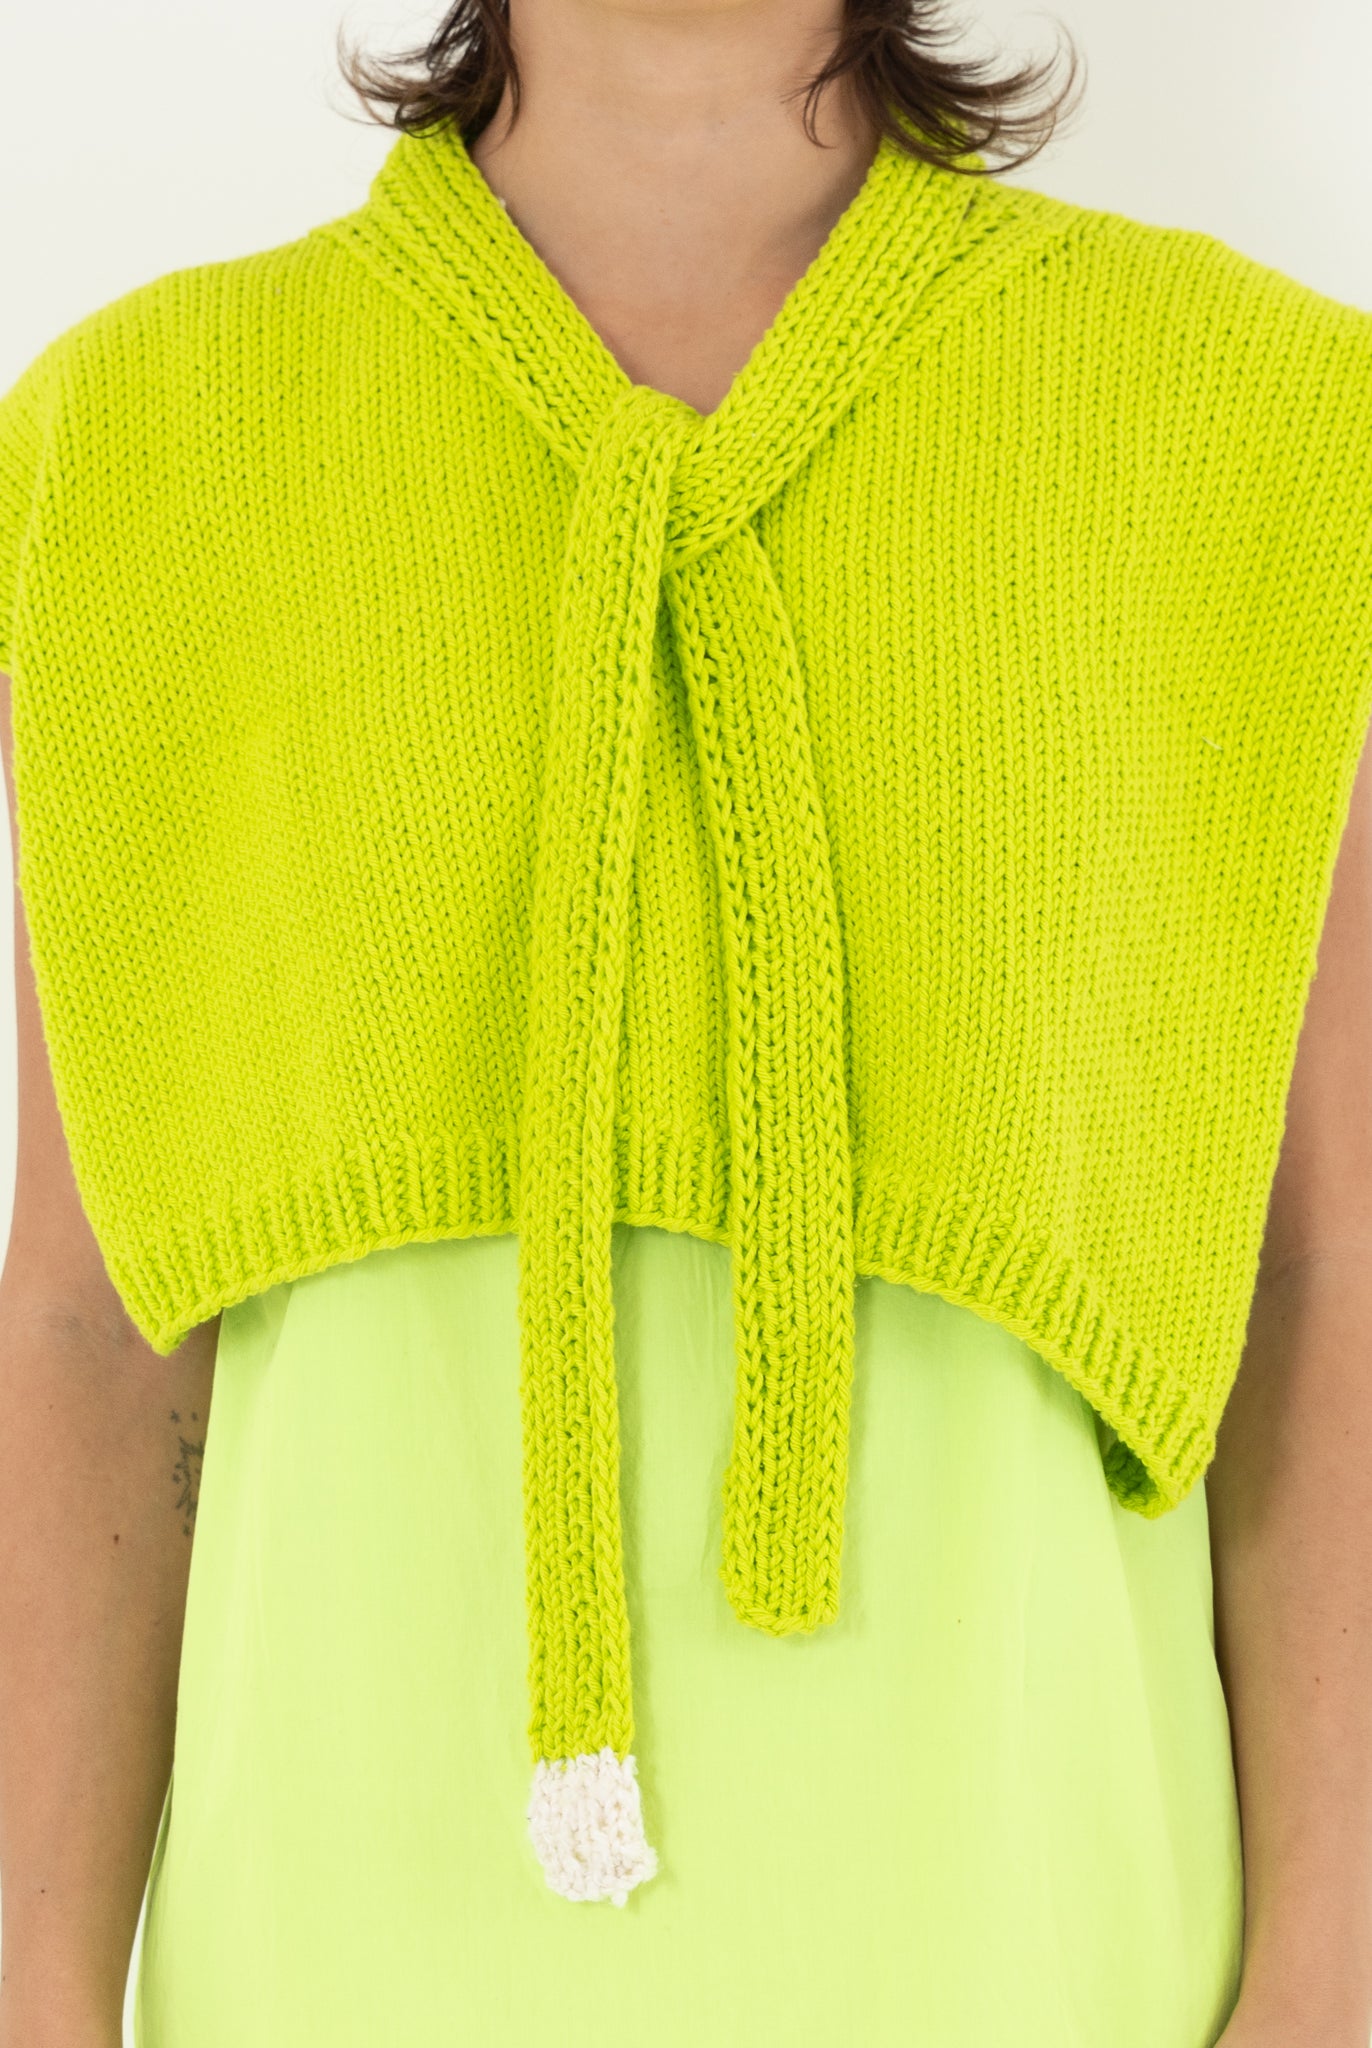 Nitto Cam Vest, Lime - Worthwhile, Inc.